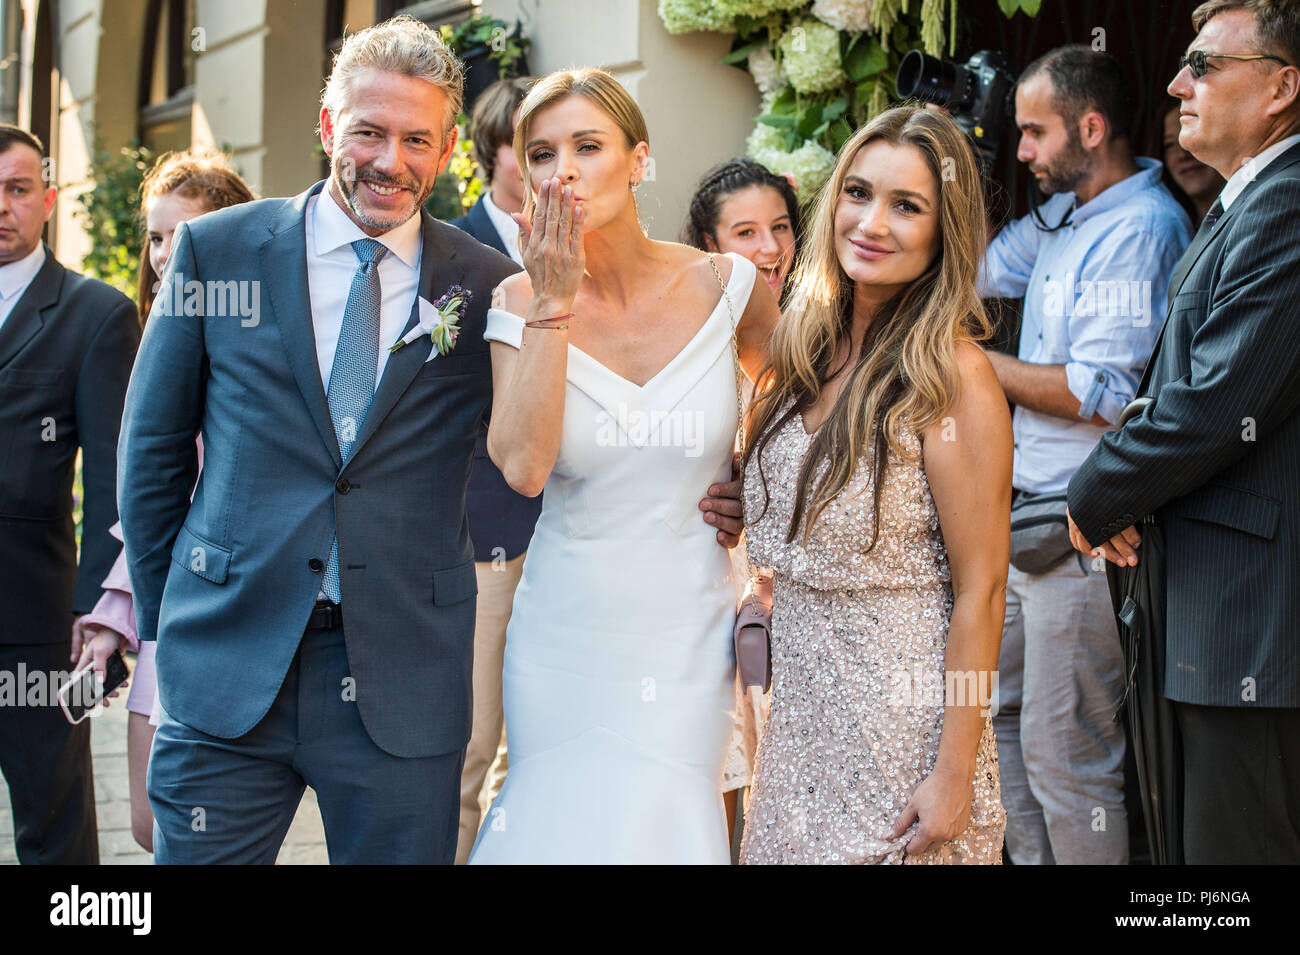 The wedding of 'Real Housewives of Miami' star Joanna Krupa and businessman  Douglas Nunes in Kraków Featuring: Joanna Krupa, Douglas Nunes Where:  Kraków, Poland When: 04 Aug 2018 Credit: Newspix.pl WENN.com **Only